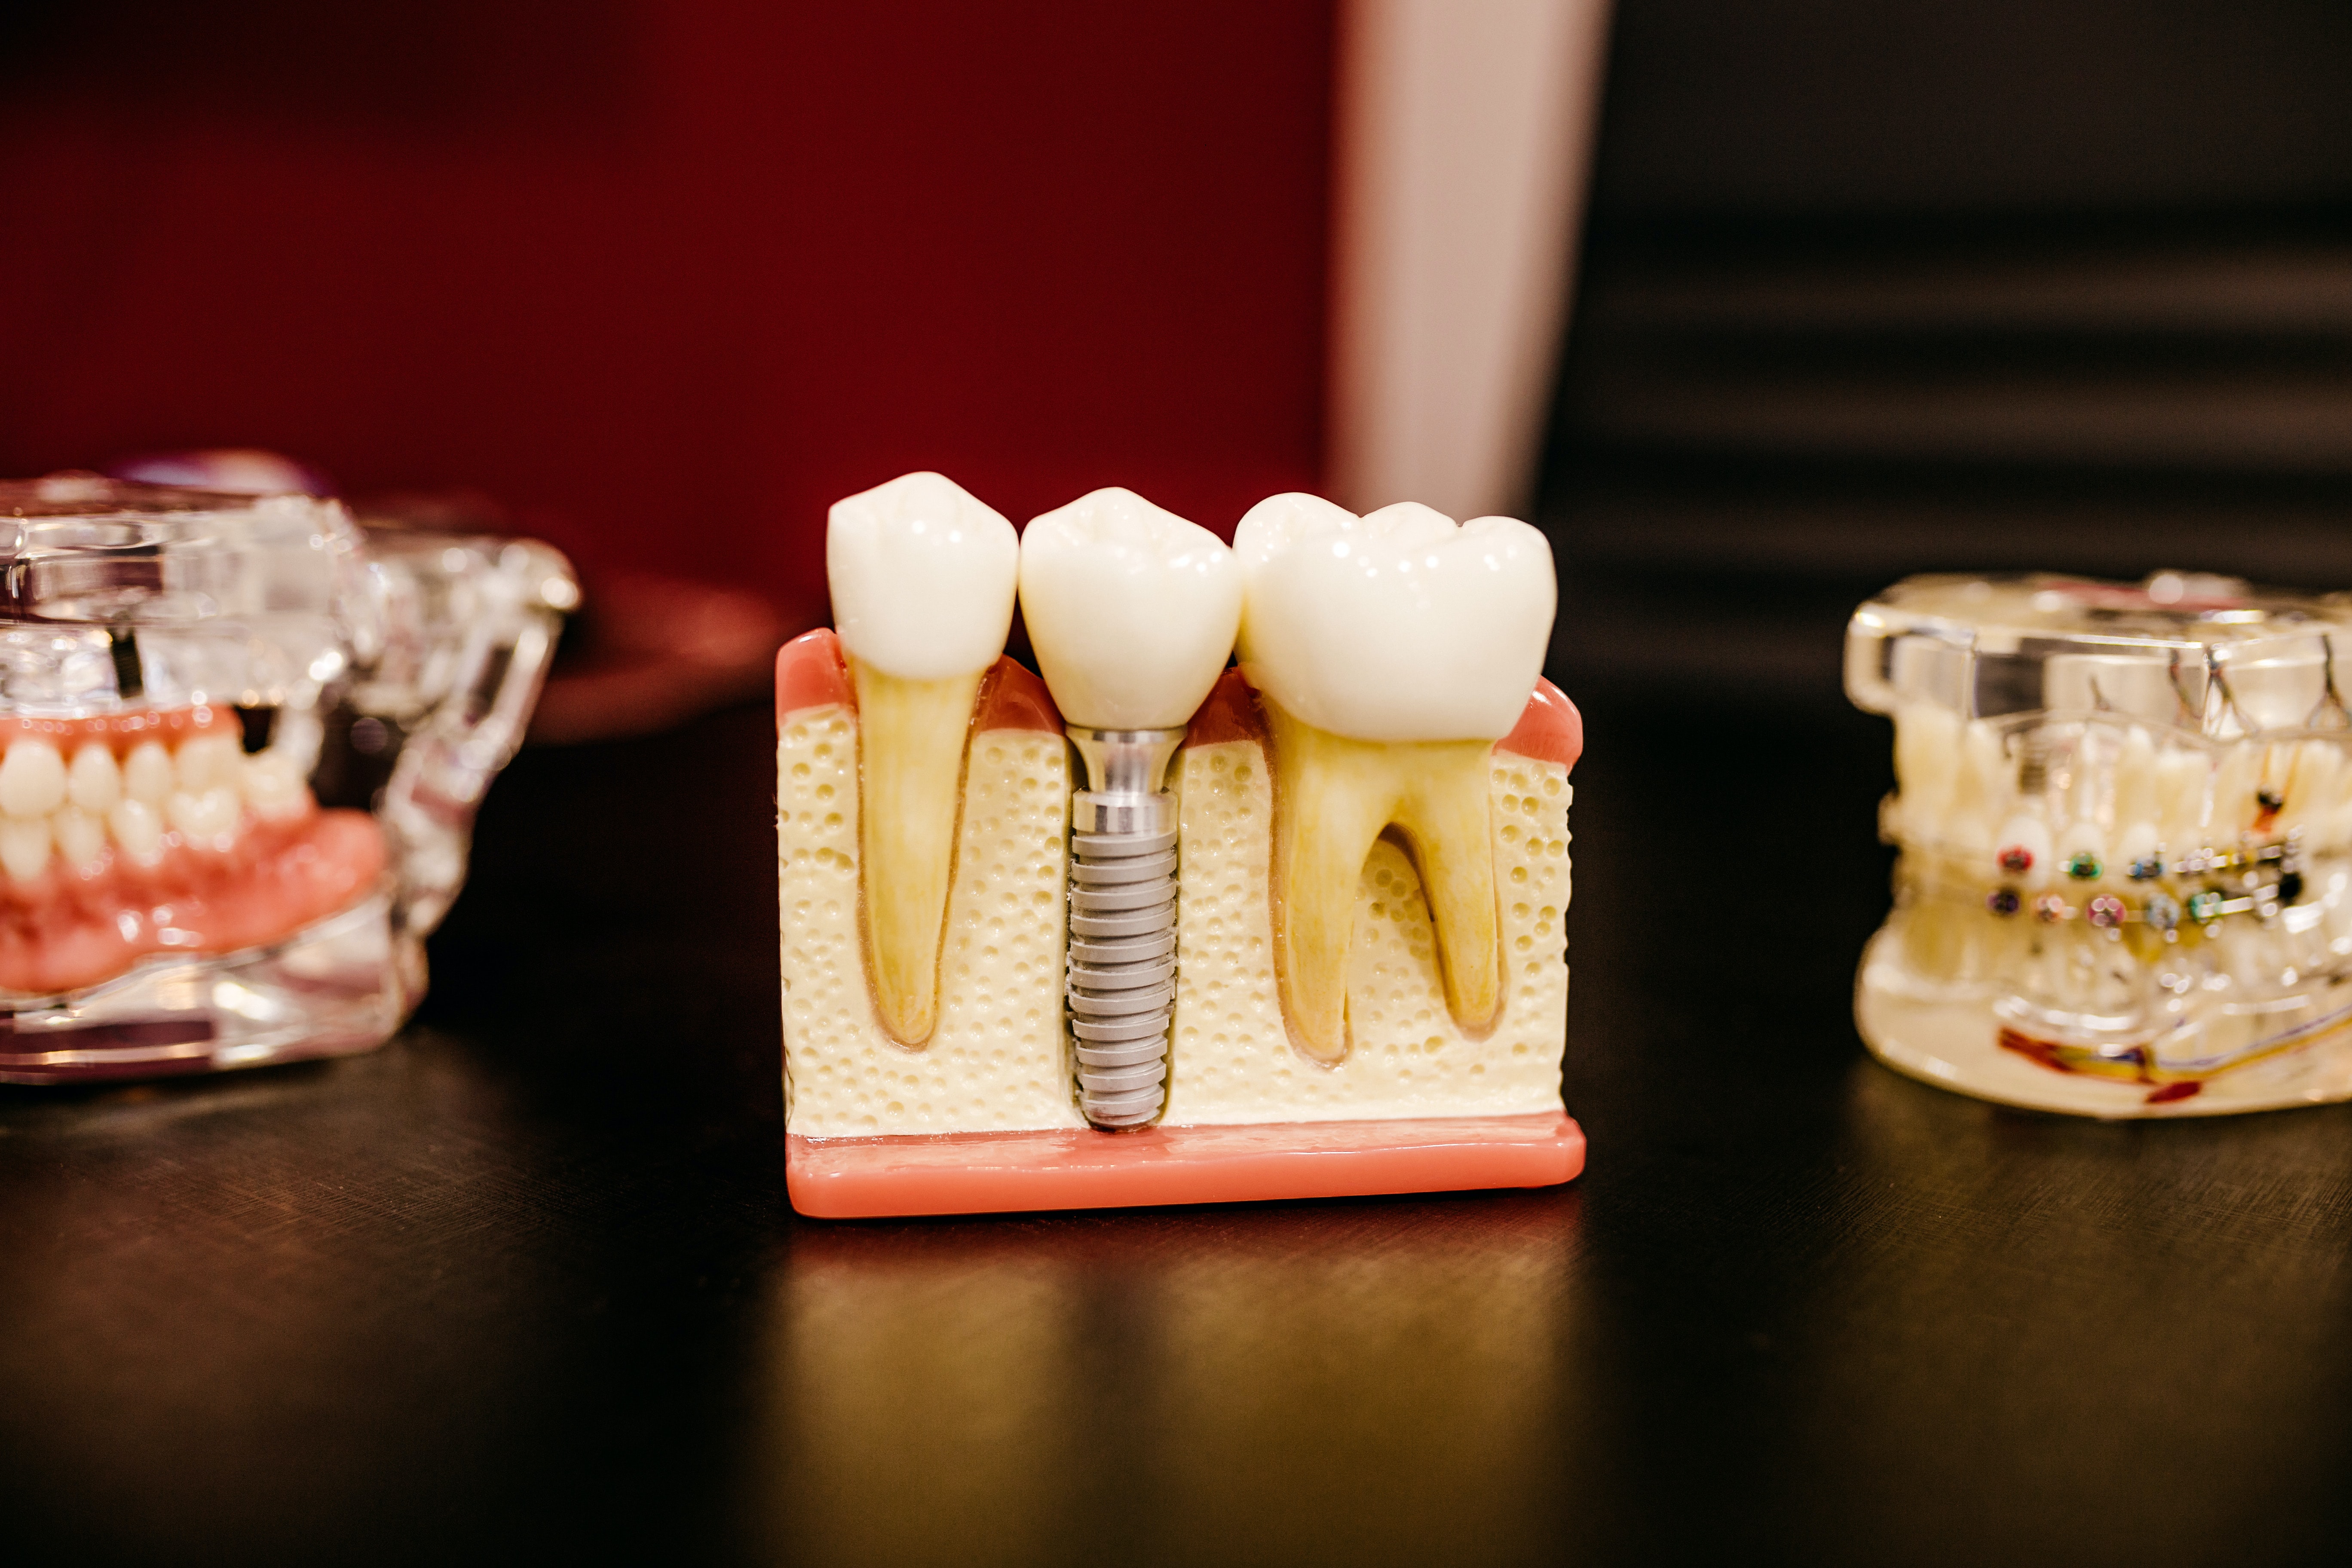 missing teeth problems - stand showing different examples of teeth and implants